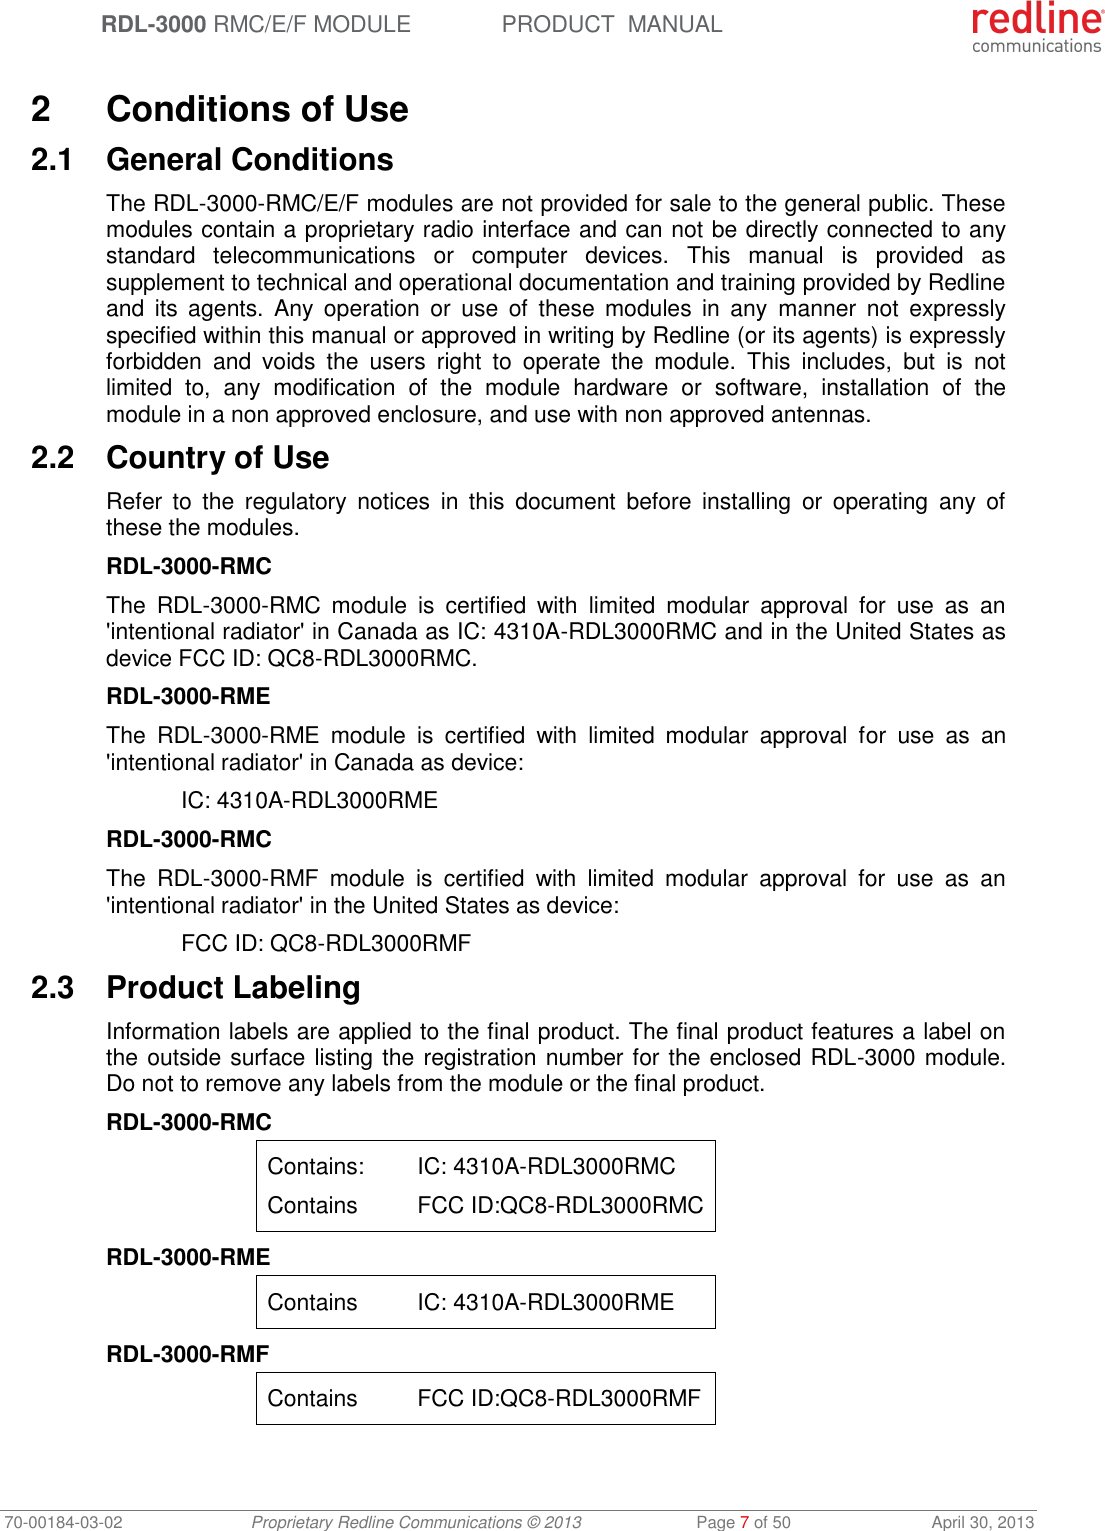  RDL-3000 RMC/E/F MODULE PRODUCT  MANUAL 70-00184-03-02 Proprietary Redline Communications © 2013  Page 7 of 50  April 30, 2013  2  Conditions of Use 2.1  General Conditions The RDL-3000-RMC/E/F modules are not provided for sale to the general public. These modules contain a proprietary radio interface and can not be directly connected to any standard  telecommunications  or  computer  devices.  This  manual  is  provided  as supplement to technical and operational documentation and training provided by Redline and  its  agents.  Any  operation  or  use  of  these  modules in  any  manner  not  expressly specified within this manual or approved in writing by Redline (or its agents) is expressly forbidden  and  voids  the  users  right  to  operate  the  module.  This  includes,  but  is  not limited  to,  any  modification  of  the  module  hardware  or  software,  installation  of  the module in a non approved enclosure, and use with non approved antennas. 2.2  Country of Use Refer  to  the  regulatory  notices  in  this  document  before  installing  or  operating  any  of these the modules. RDL-3000-RMC The  RDL-3000-RMC  module  is  certified  with  limited  modular  approval  for  use  as  an &apos;intentional radiator&apos; in Canada as IC: 4310A-RDL3000RMC and in the United States as device FCC ID: QC8-RDL3000RMC. RDL-3000-RME The  RDL-3000-RME  module  is  certified  with  limited  modular  approval  for  use  as  an &apos;intentional radiator&apos; in Canada as device:   IC: 4310A-RDL3000RME RDL-3000-RMC The  RDL-3000-RMF  module  is  certified  with  limited  modular  approval  for  use  as  an &apos;intentional radiator&apos; in the United States as device:   FCC ID: QC8-RDL3000RMF 2.3  Product Labeling Information labels are applied to the final product. The final product features a label on the outside surface listing the registration number for the enclosed RDL-3000 module. Do not to remove any labels from the module or the final product. RDL-3000-RMC Contains:  IC: 4310A-RDL3000RMC Contains  FCC ID:QC8-RDL3000RMC RDL-3000-RME Contains  IC: 4310A-RDL3000RME RDL-3000-RMF Contains  FCC ID:QC8-RDL3000RMF 